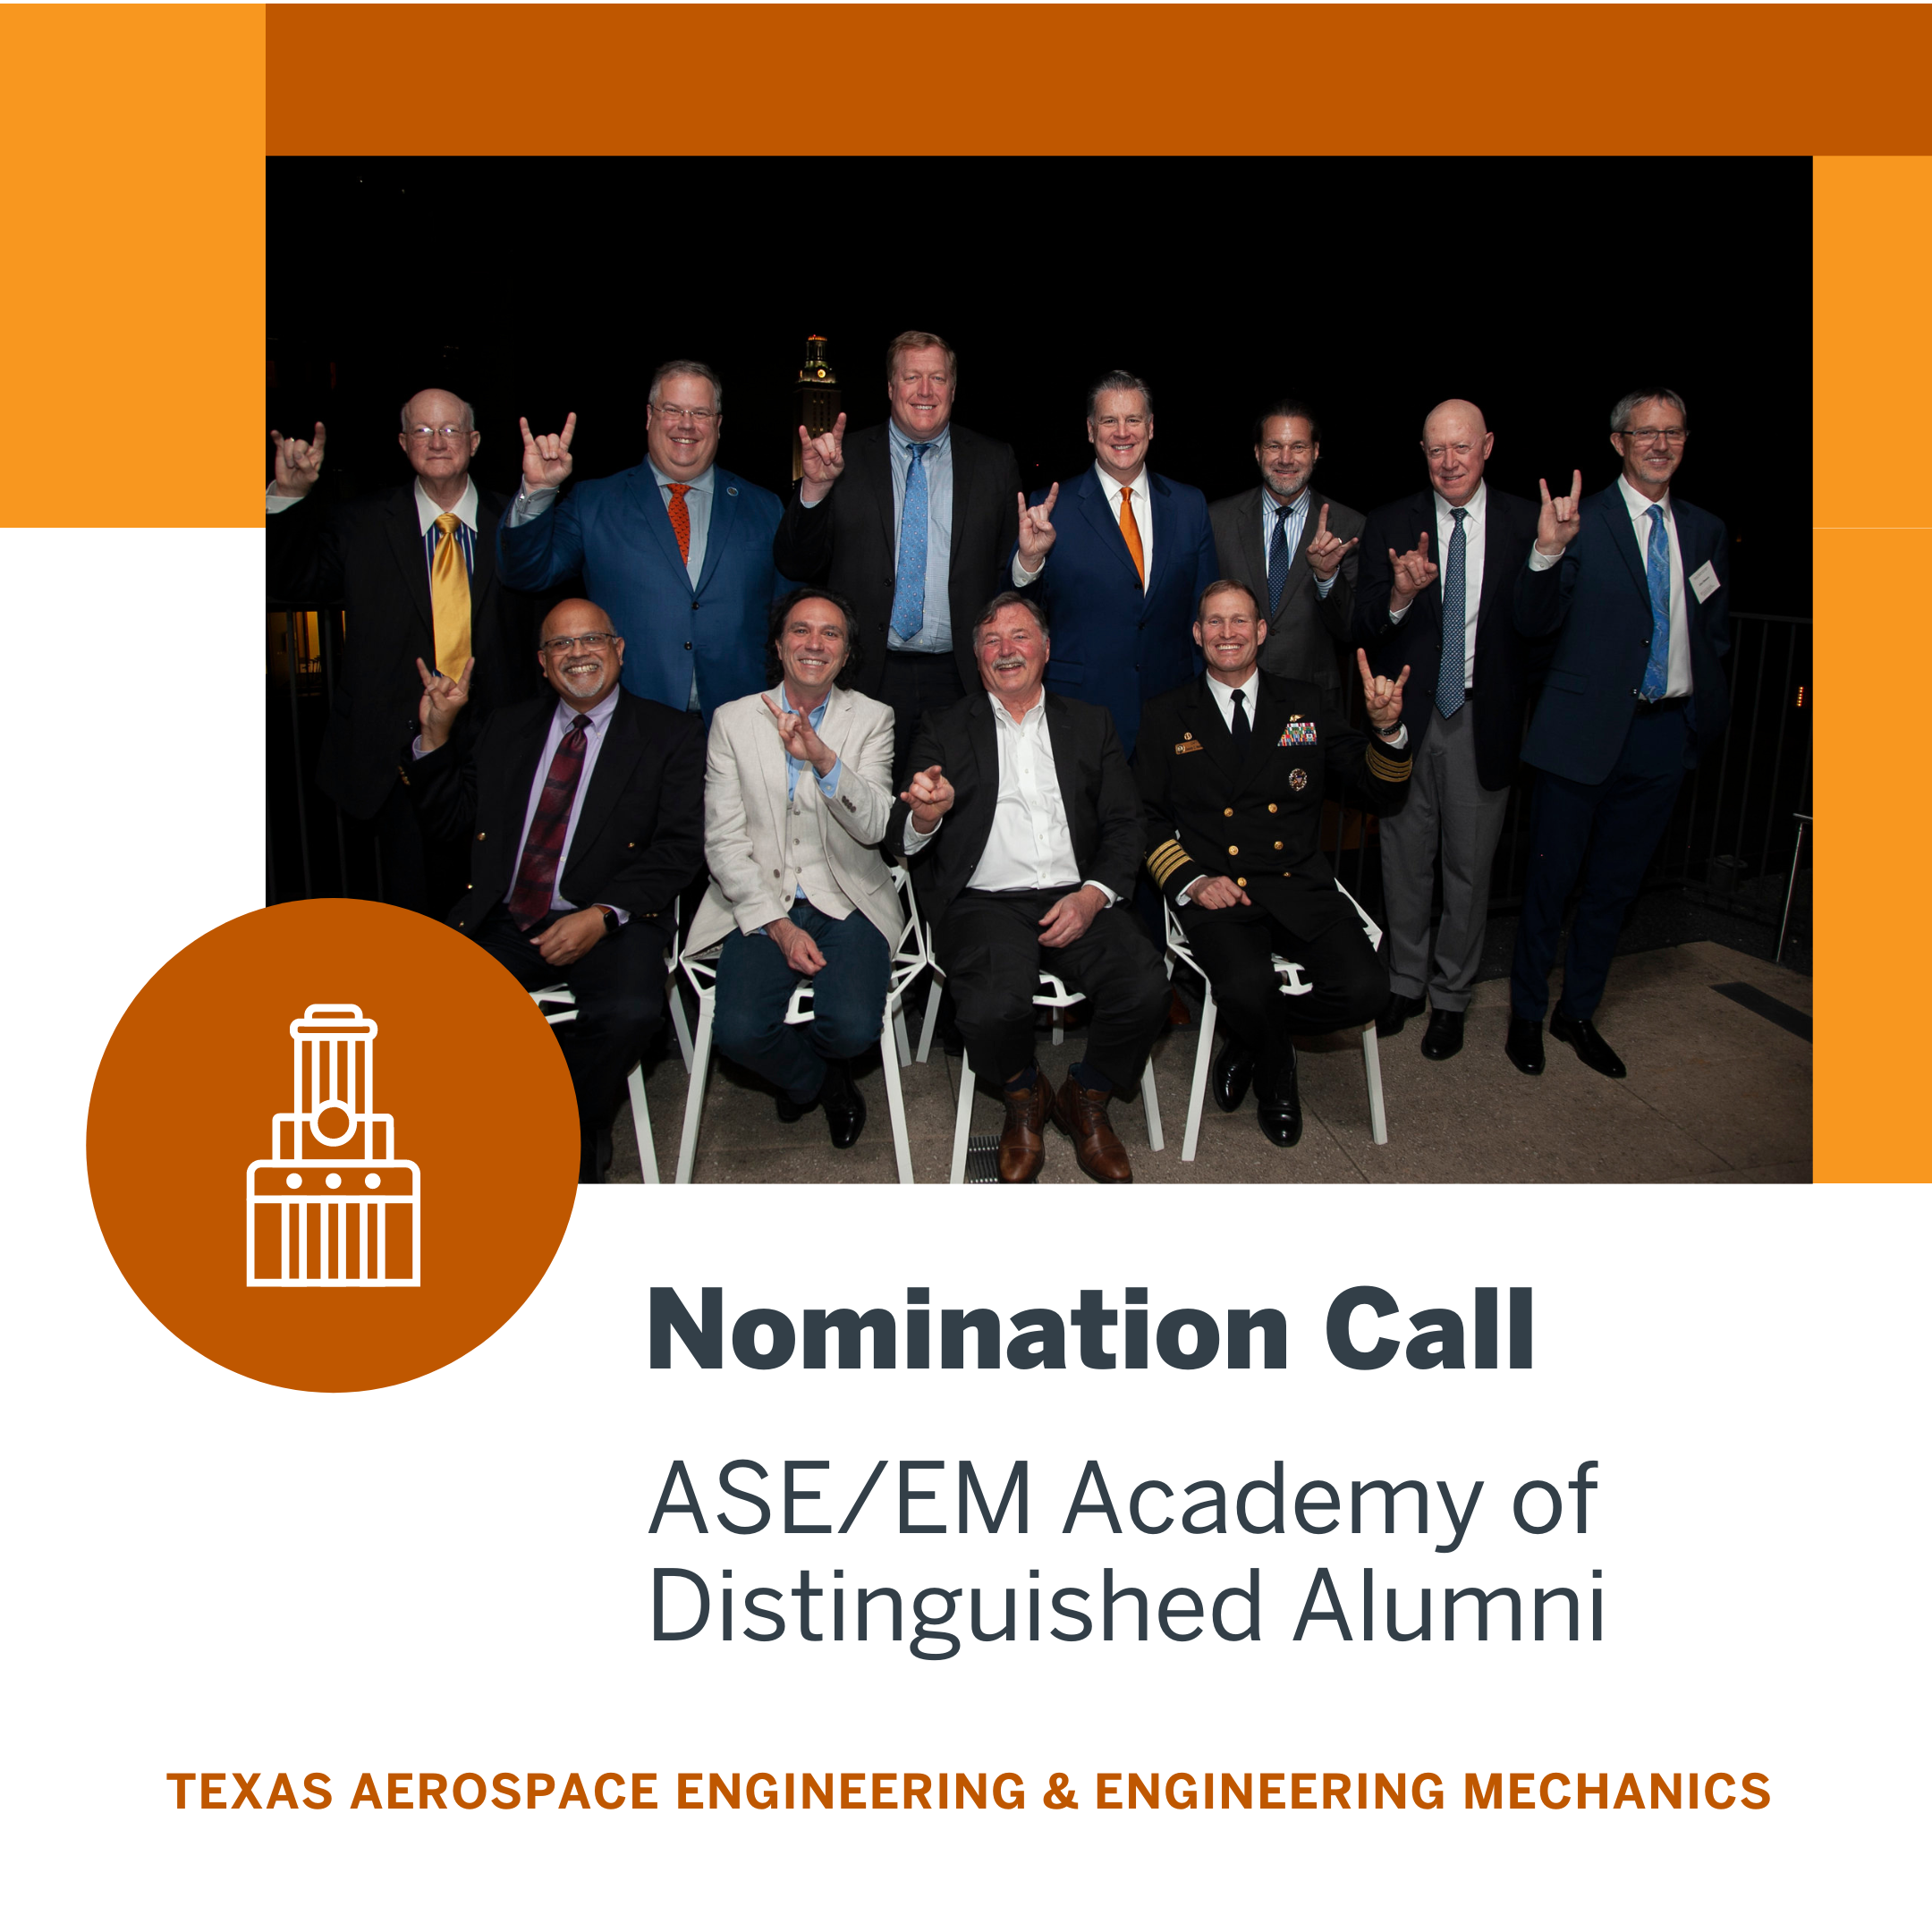 Academy of Distinguished Alumni nomination call graphic